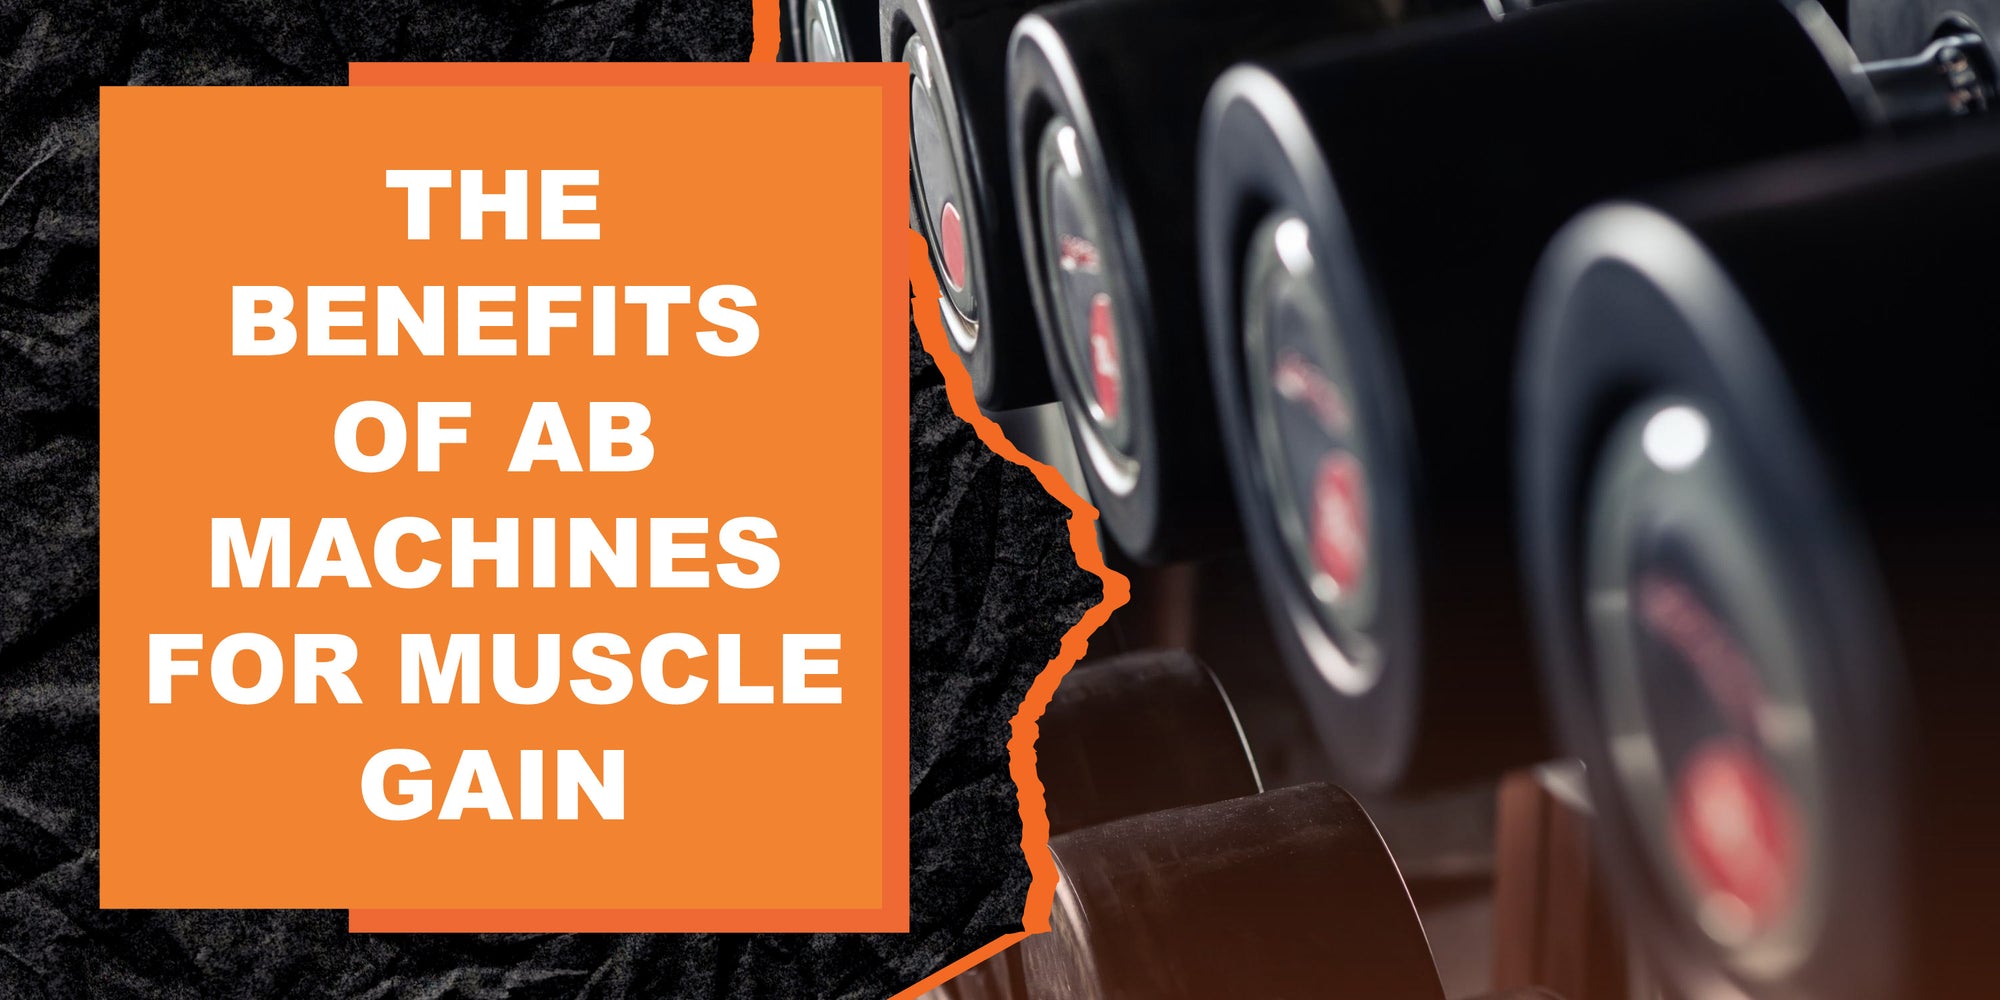 The Benefits of Ab Machines for Muscle Gain